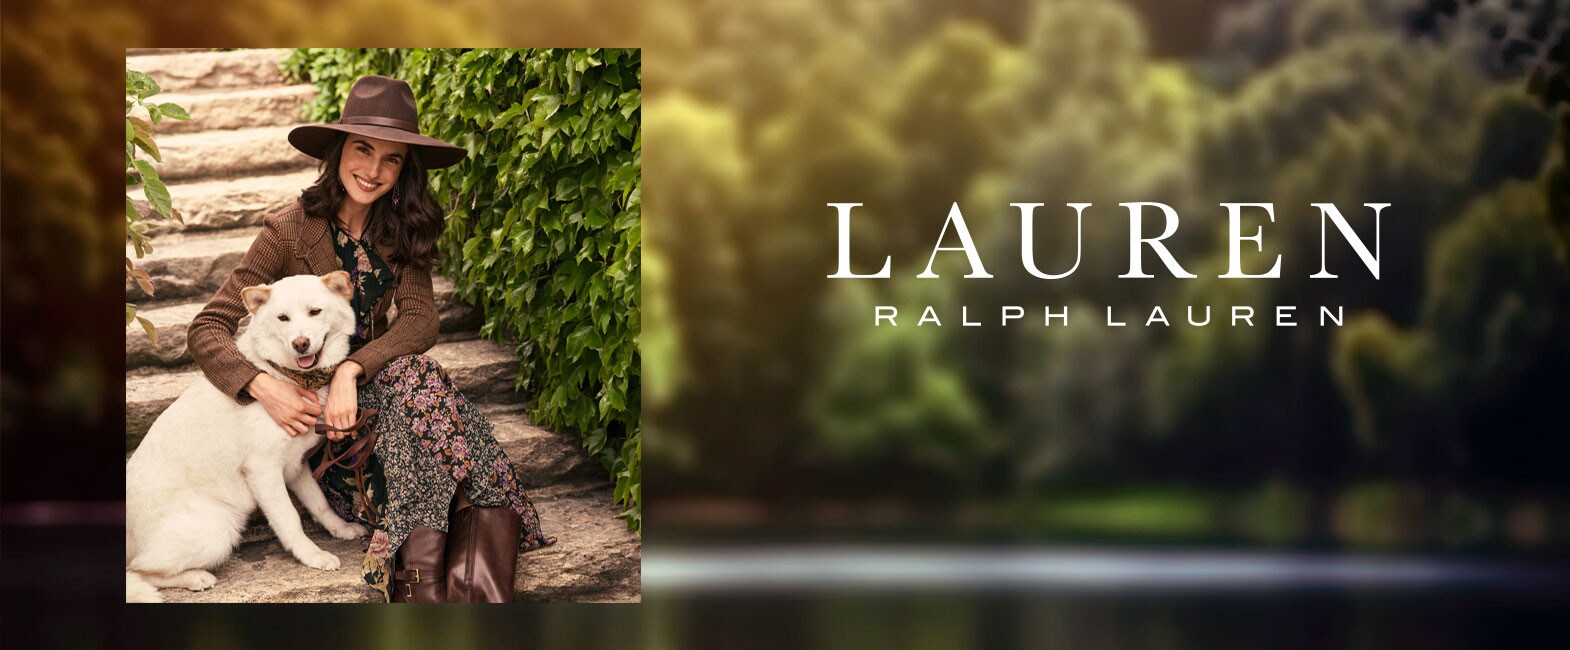 The World of Ralph Lauren: Apparel, Shoes, and More